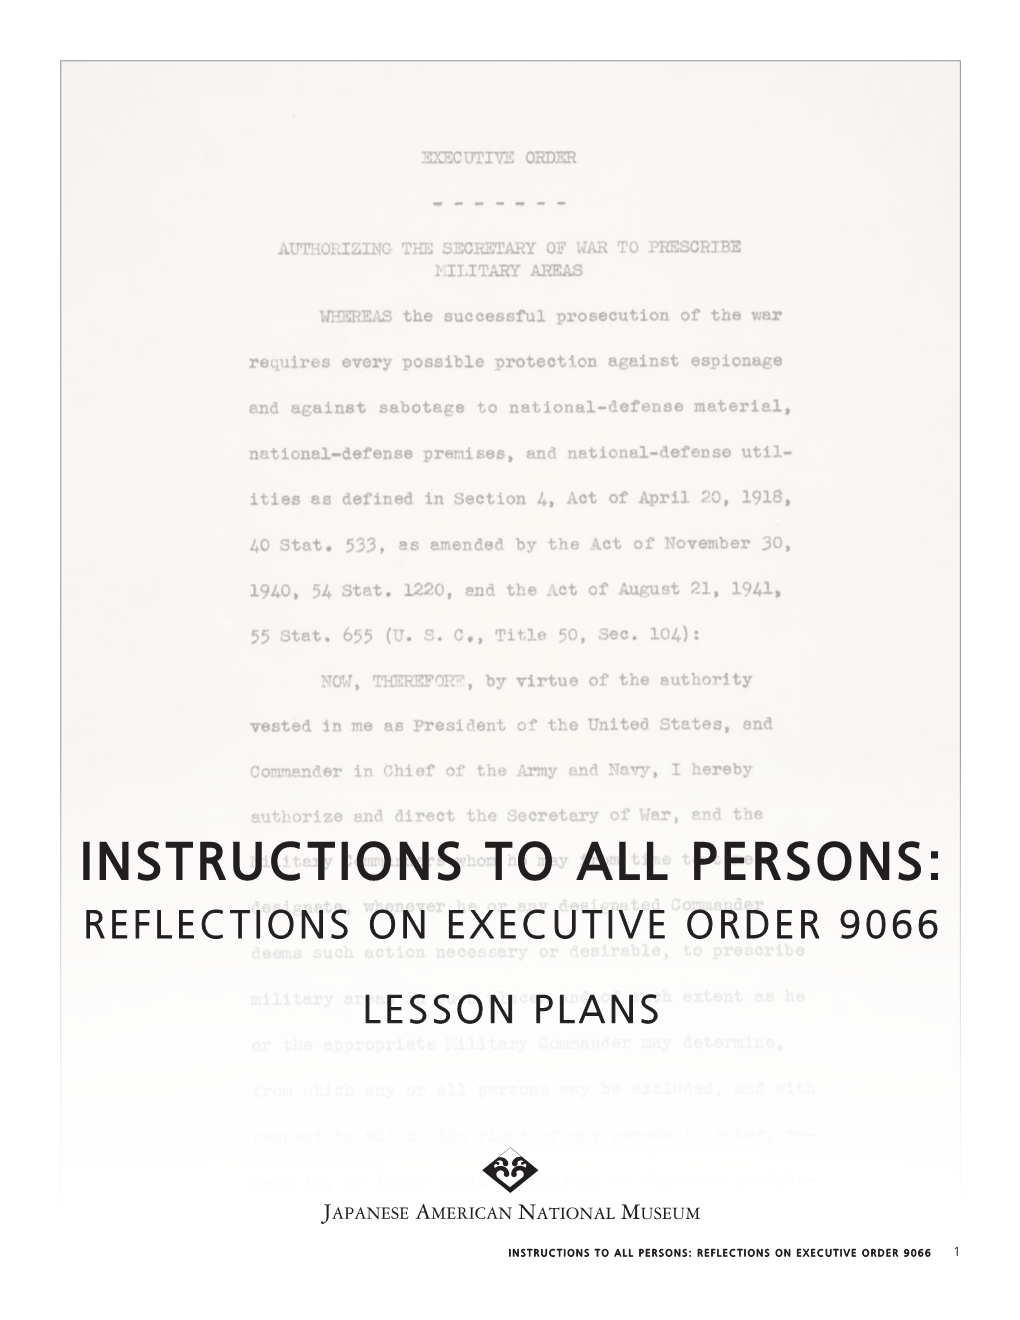 Instructions to All Persons: Reflections on Executive Order 9066 1 Instructions to All Persons: Reflections on Executive Order 9066 LESSON PLANS